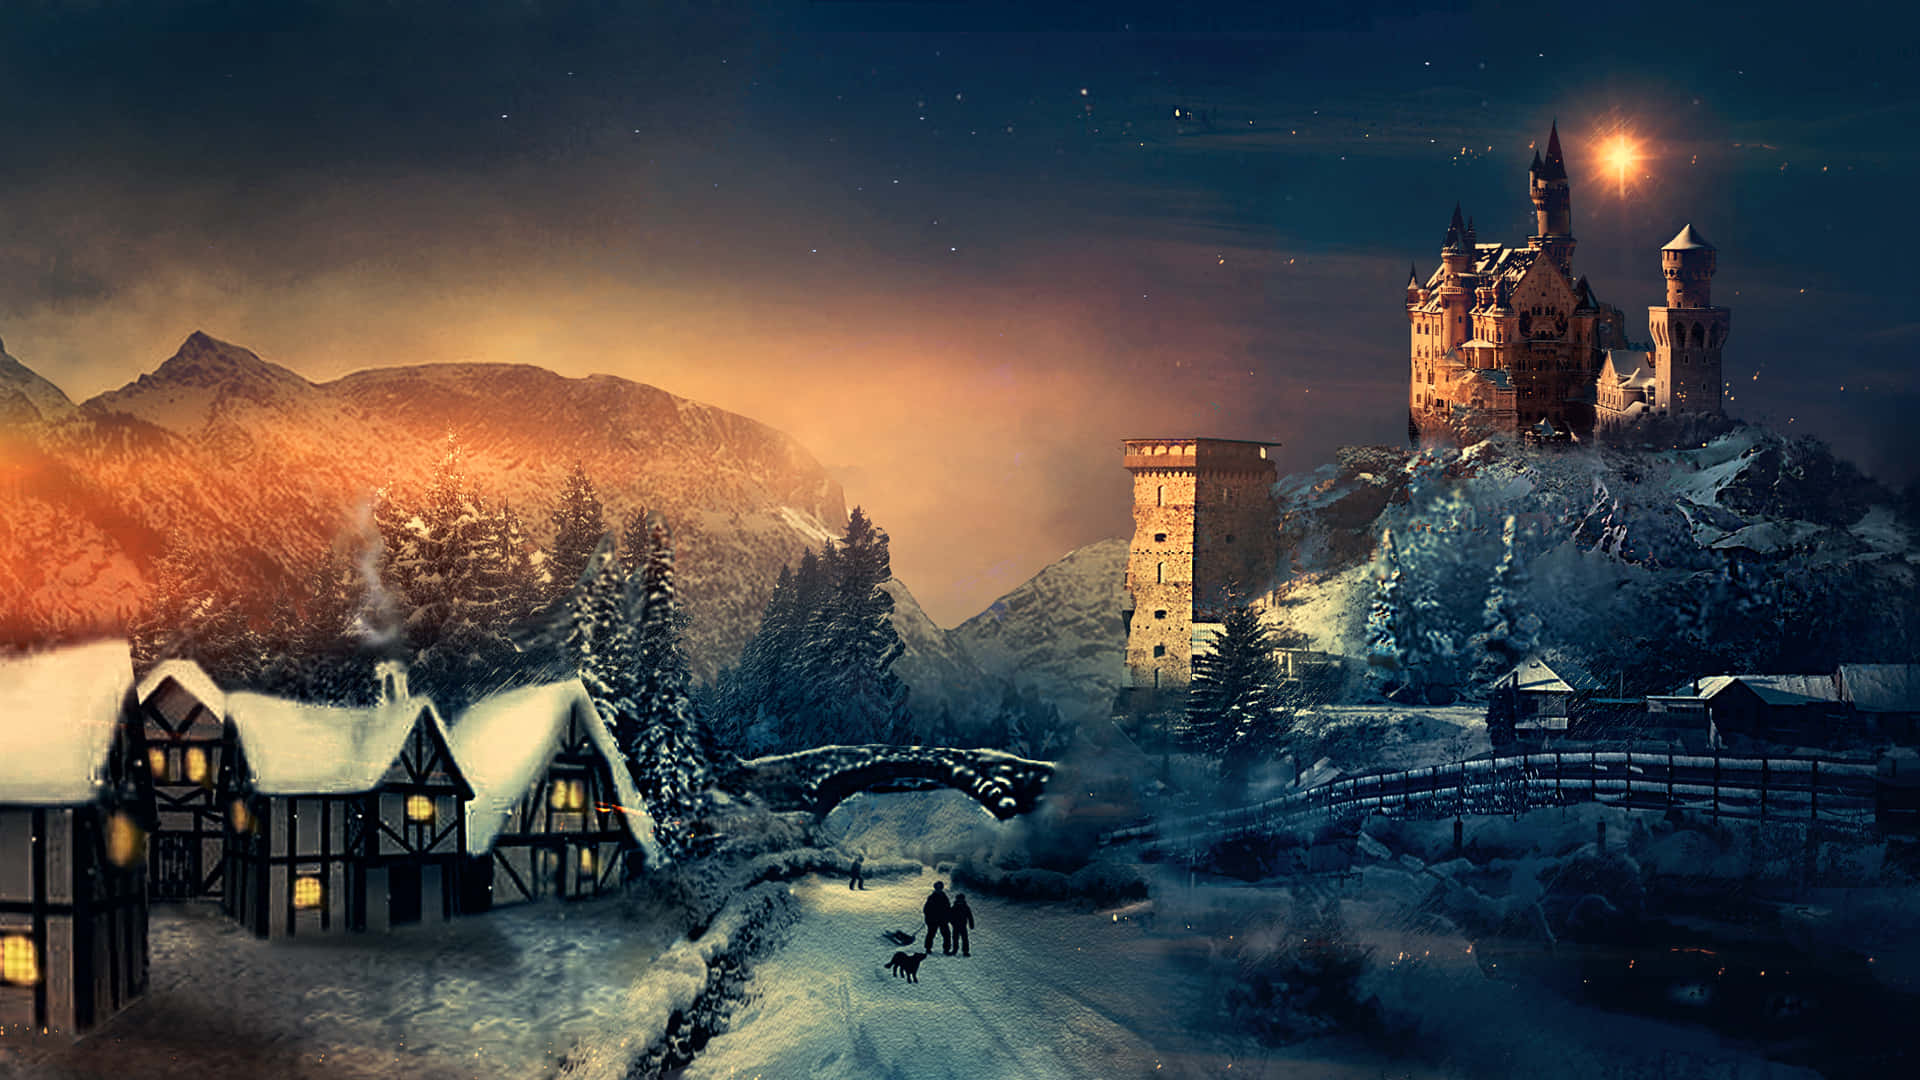 Experience the magic of Christmas in a Winter Wonderland Wallpaper